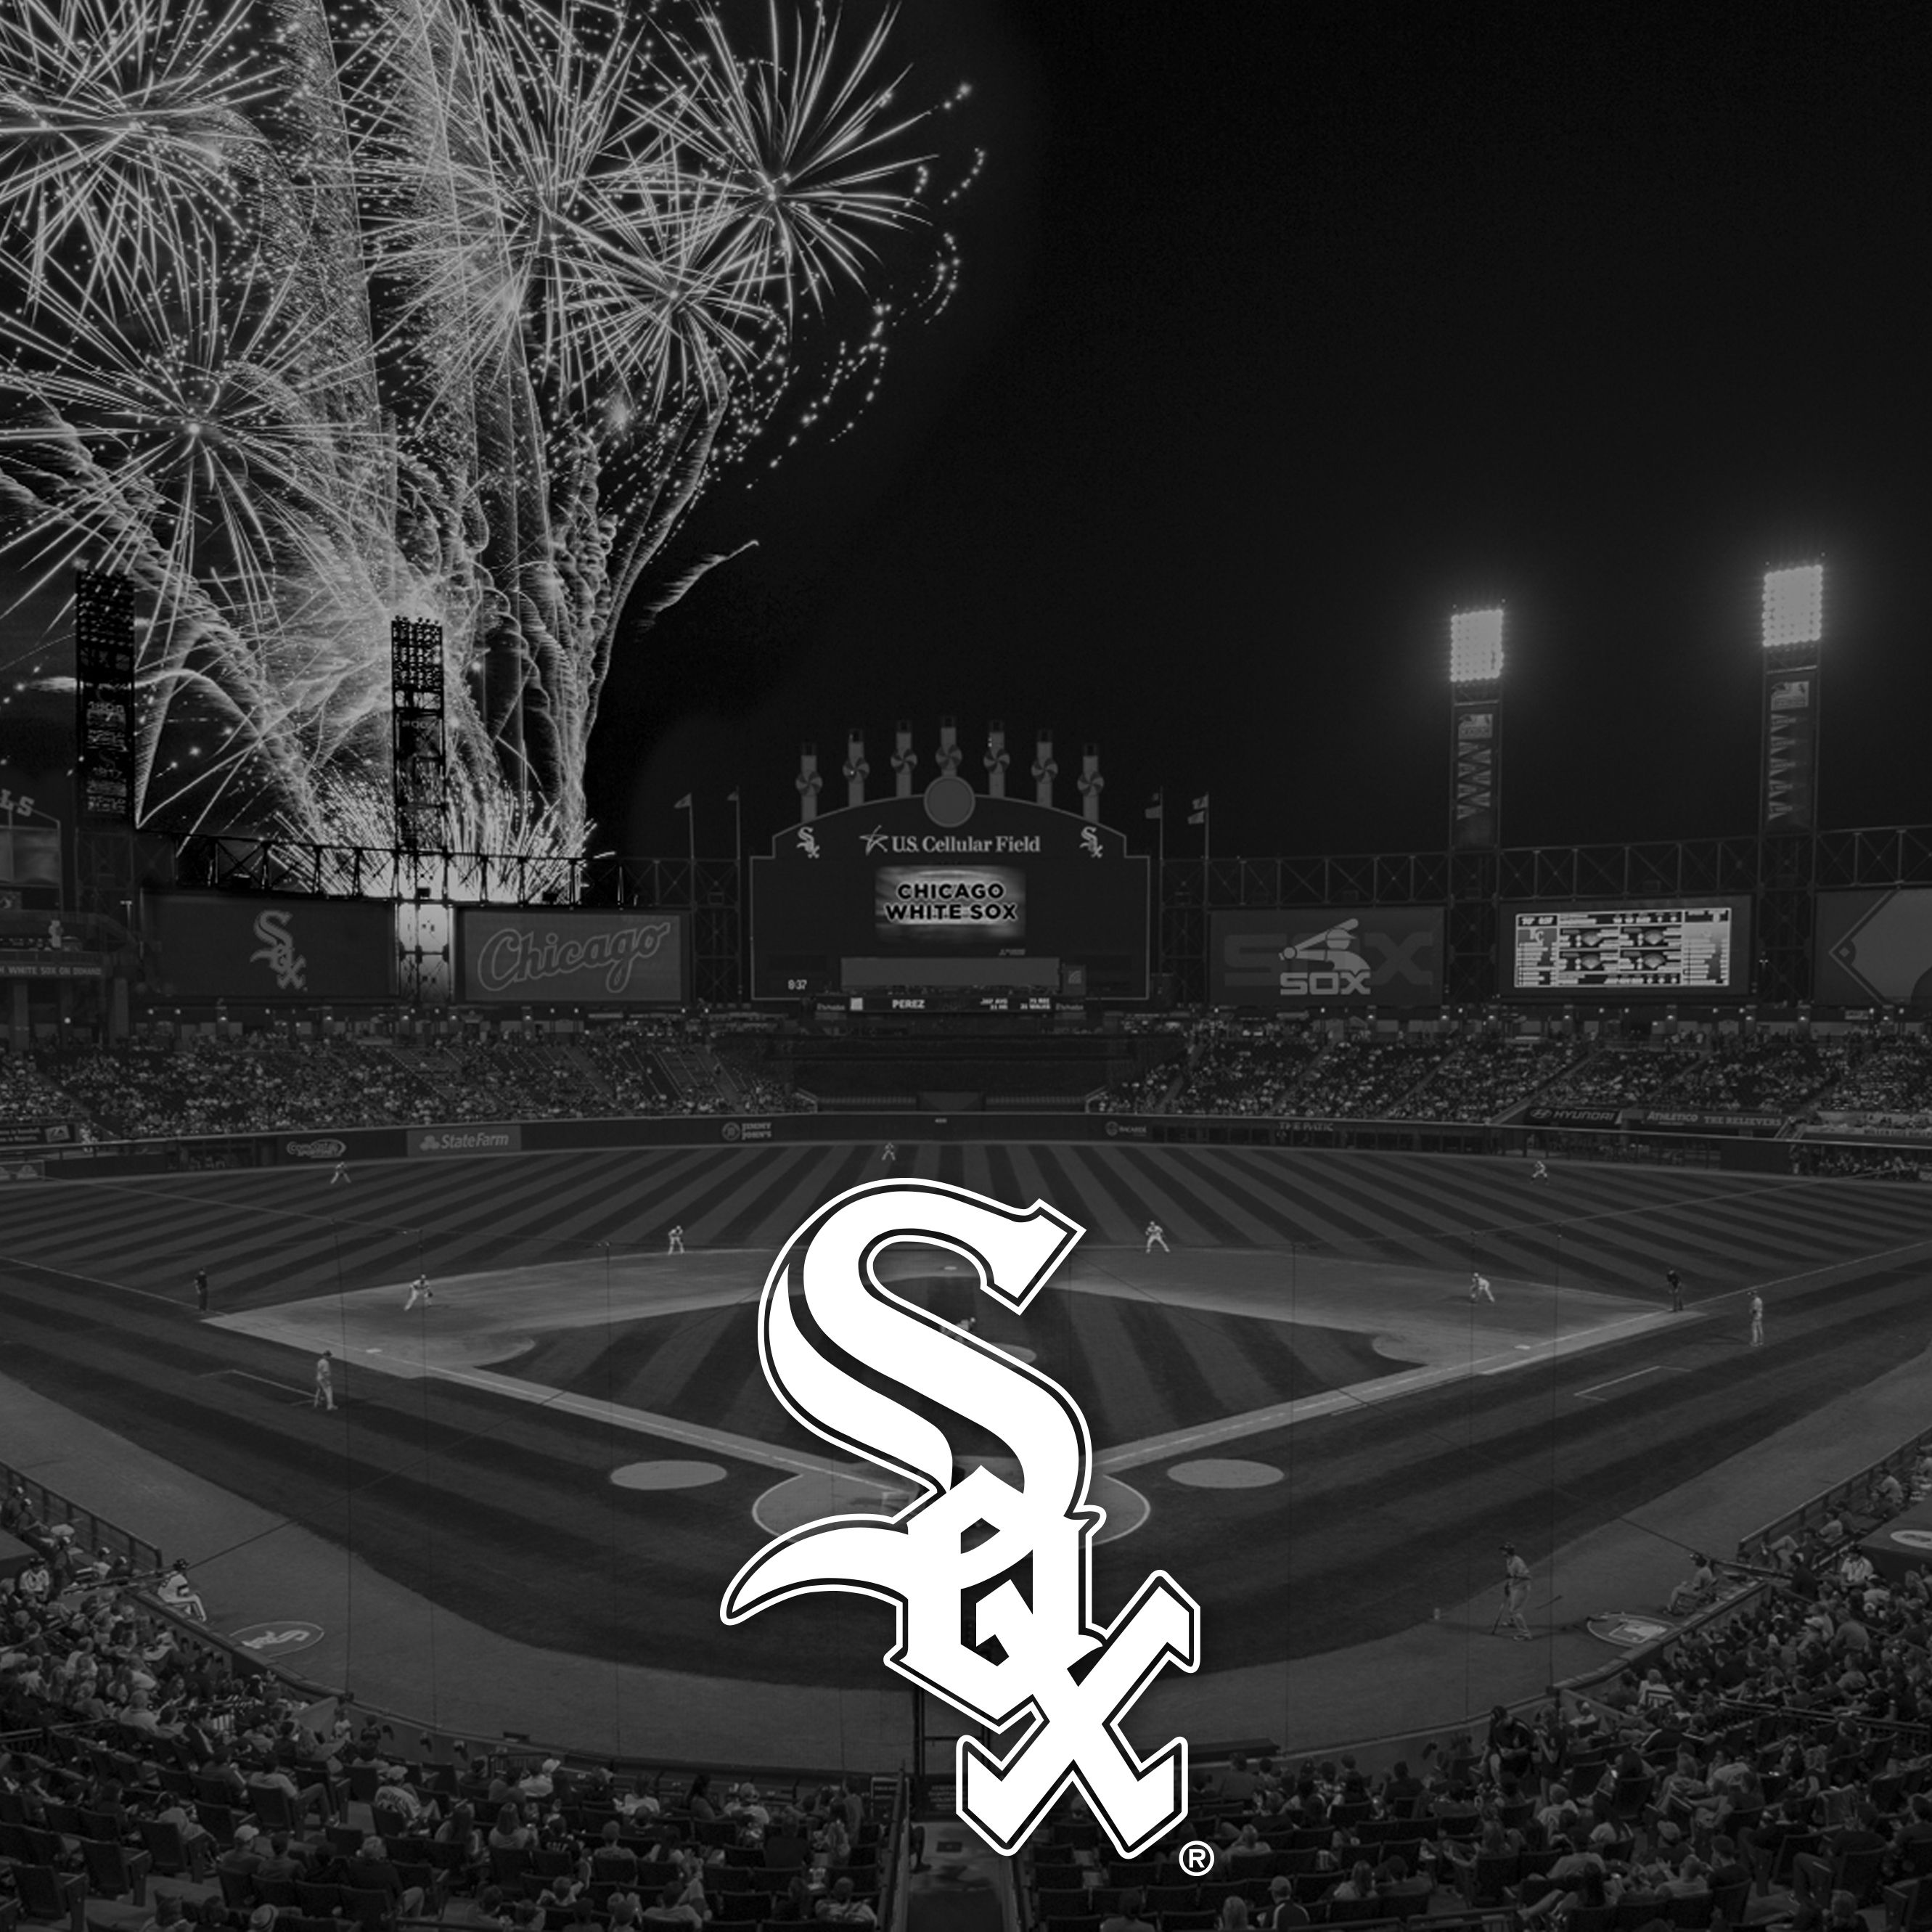 Chicago White Sox Wallpapers